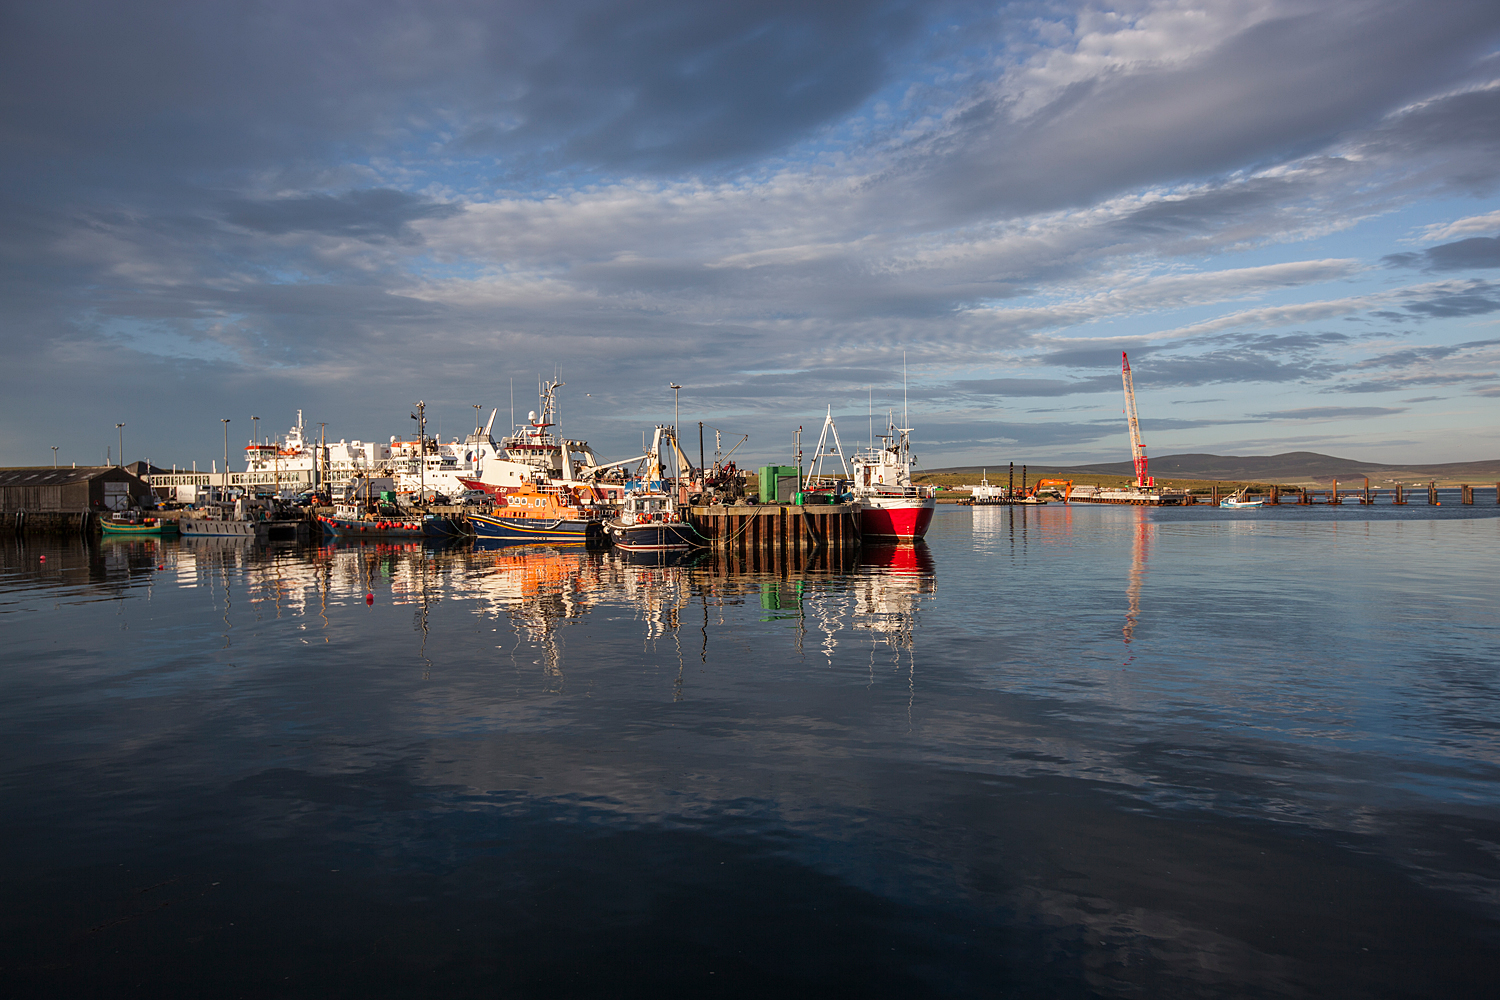 Stromness Harbour and Lifeboat